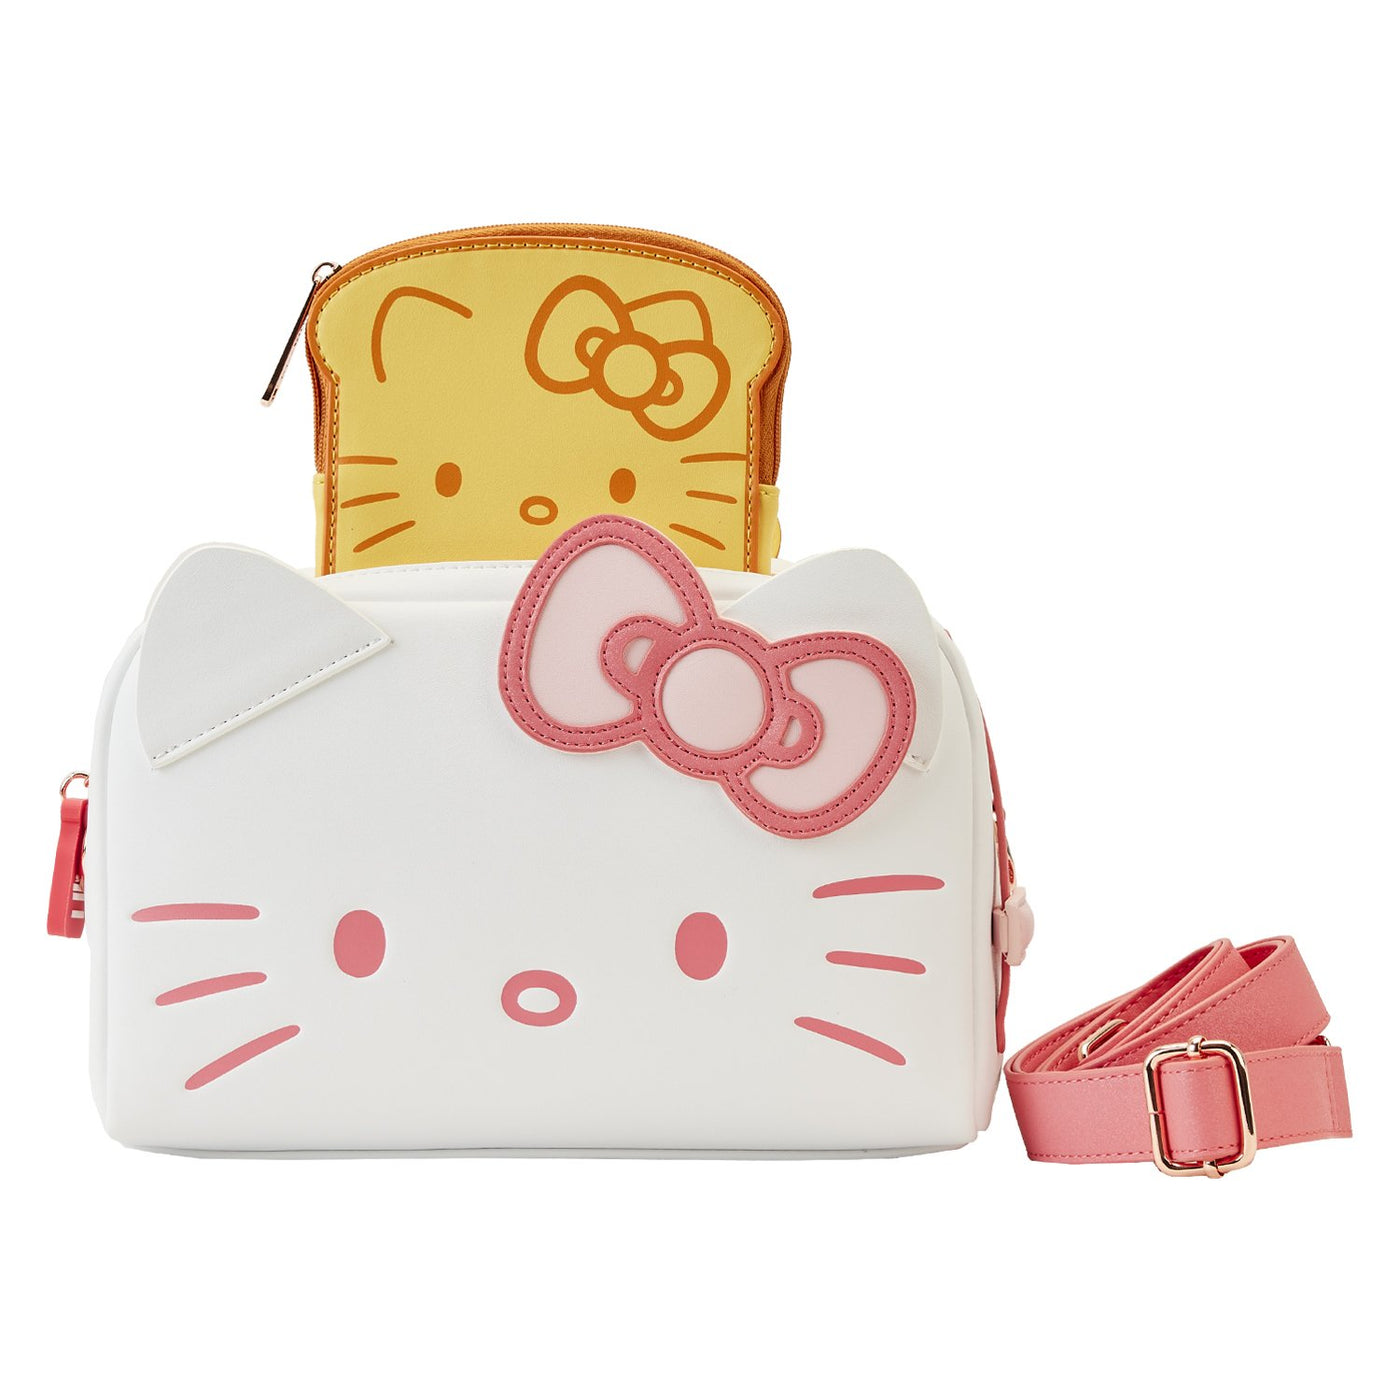 671803458260 - Loungefly Sanrio Hello Kitty Breakfast Toaster Crossbody - Front with Coin Purse